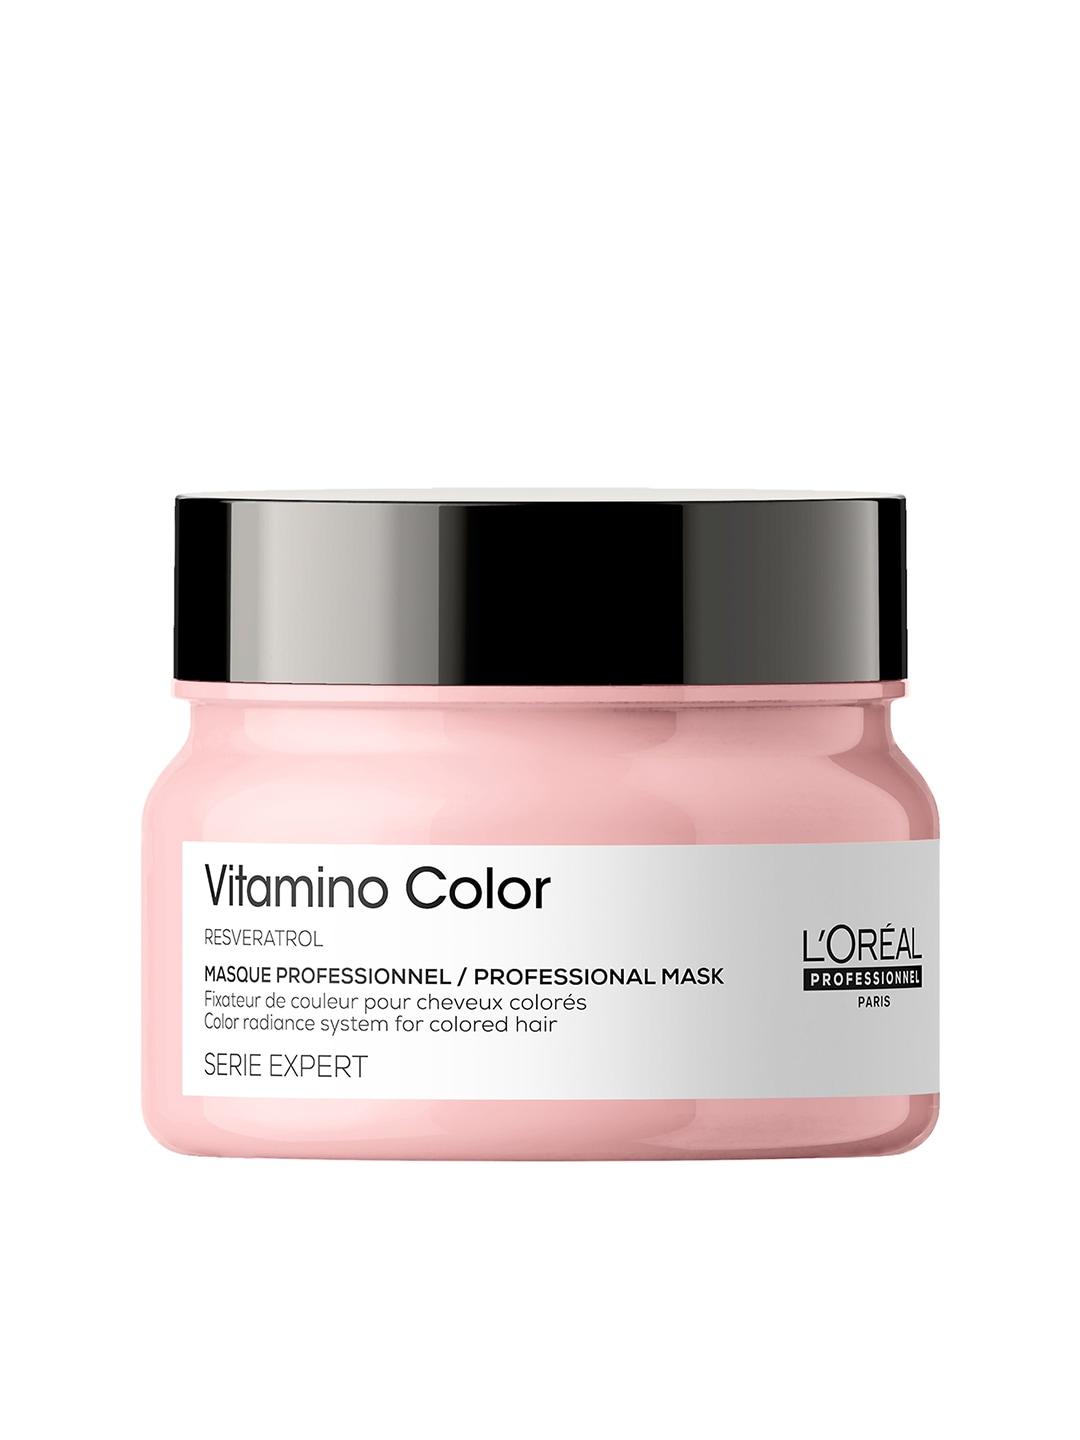 loreal professionnel vitamino color hair mask with resveratrol for colored hair-250g